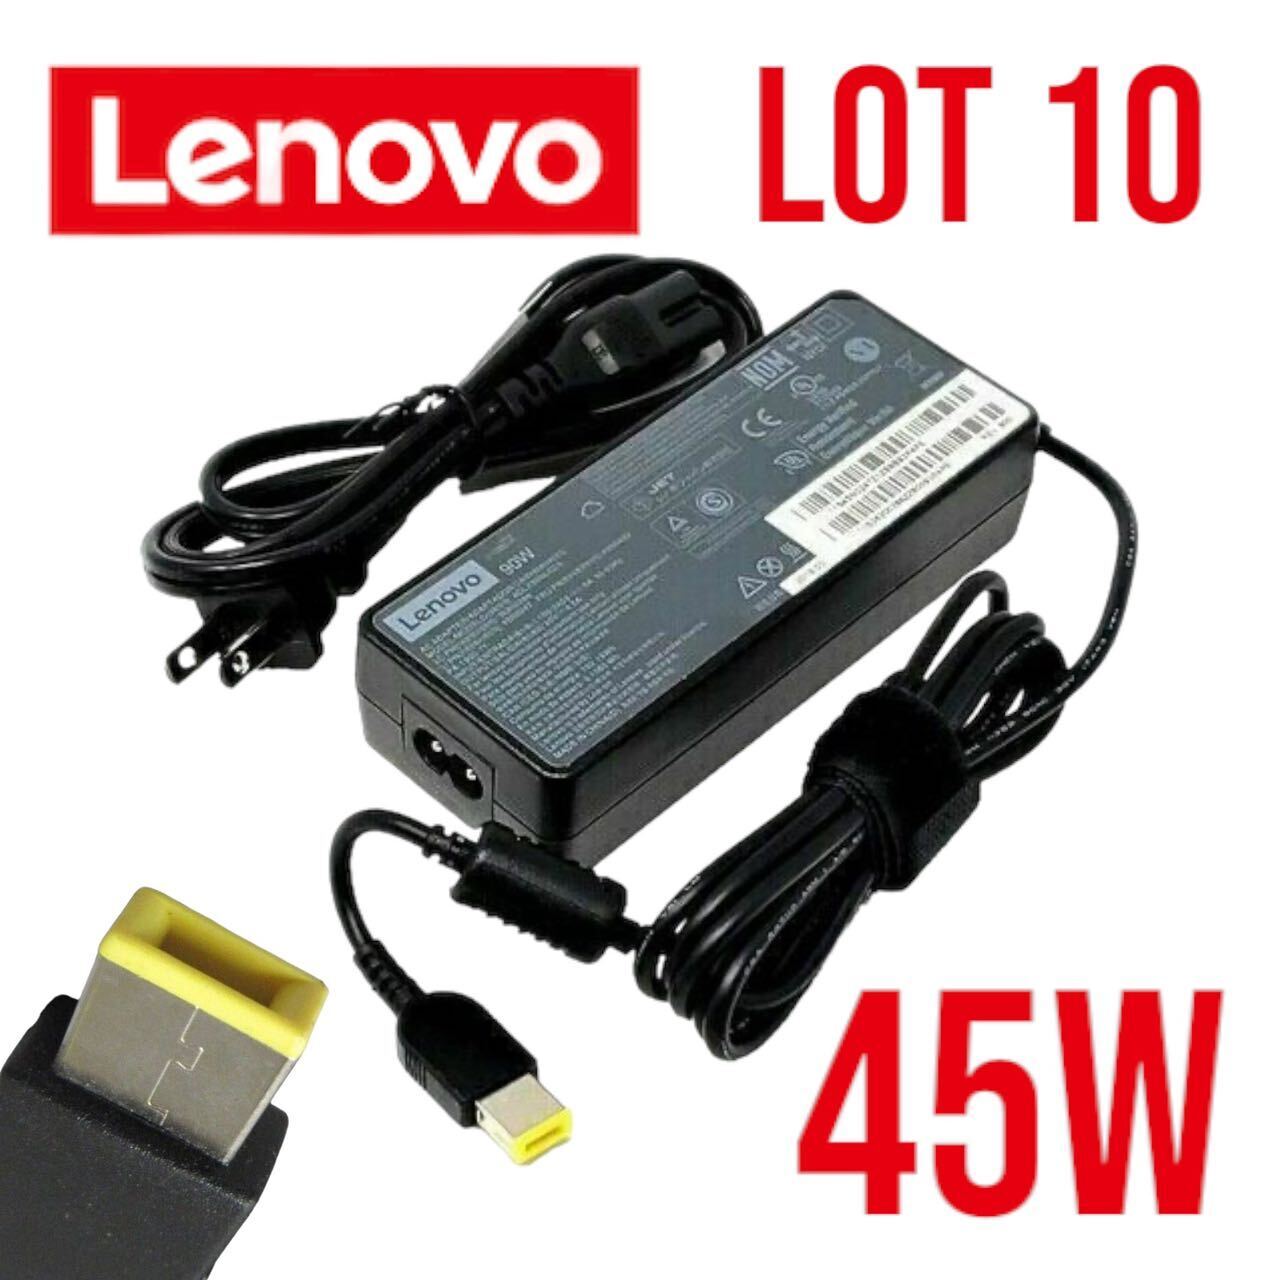 Lot of 10 Genuine LENOVO ThinkPad AC Adapter Power Charger 45W 20V Square Tip